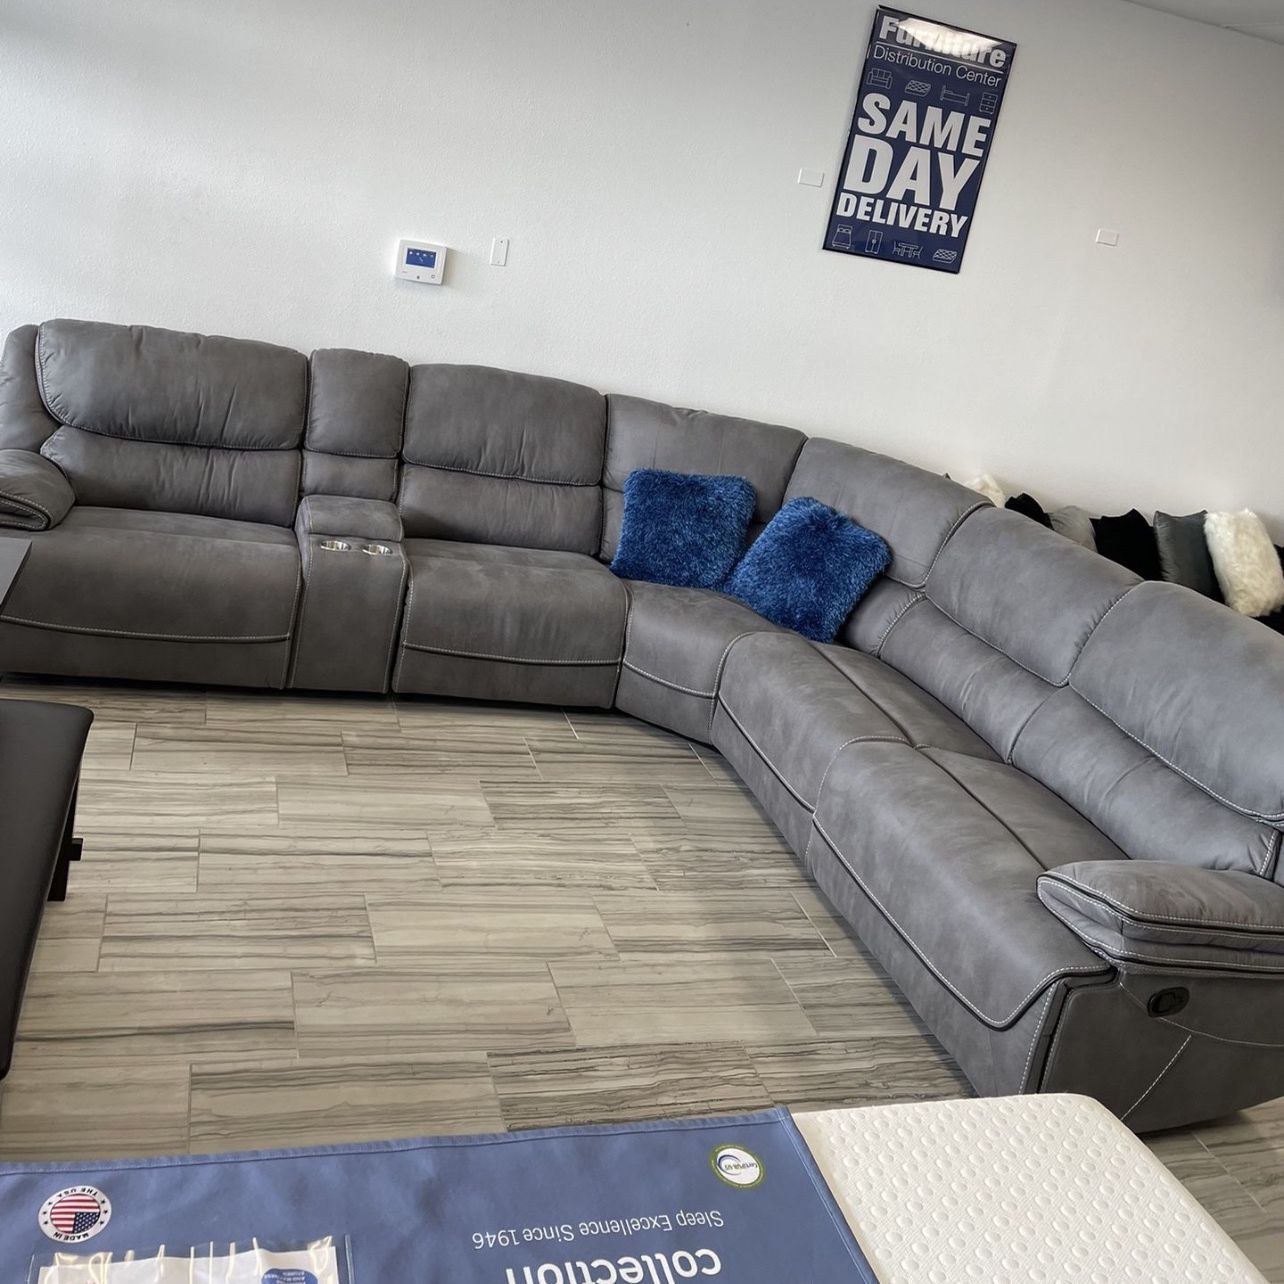 COMFY NEW ALEJANDRA RECLINING SECTIONAL SOFA ON SALE ONLY $1499.IN STOCK SAME DAY DELIVERY 🚚 EASY FINANCING 